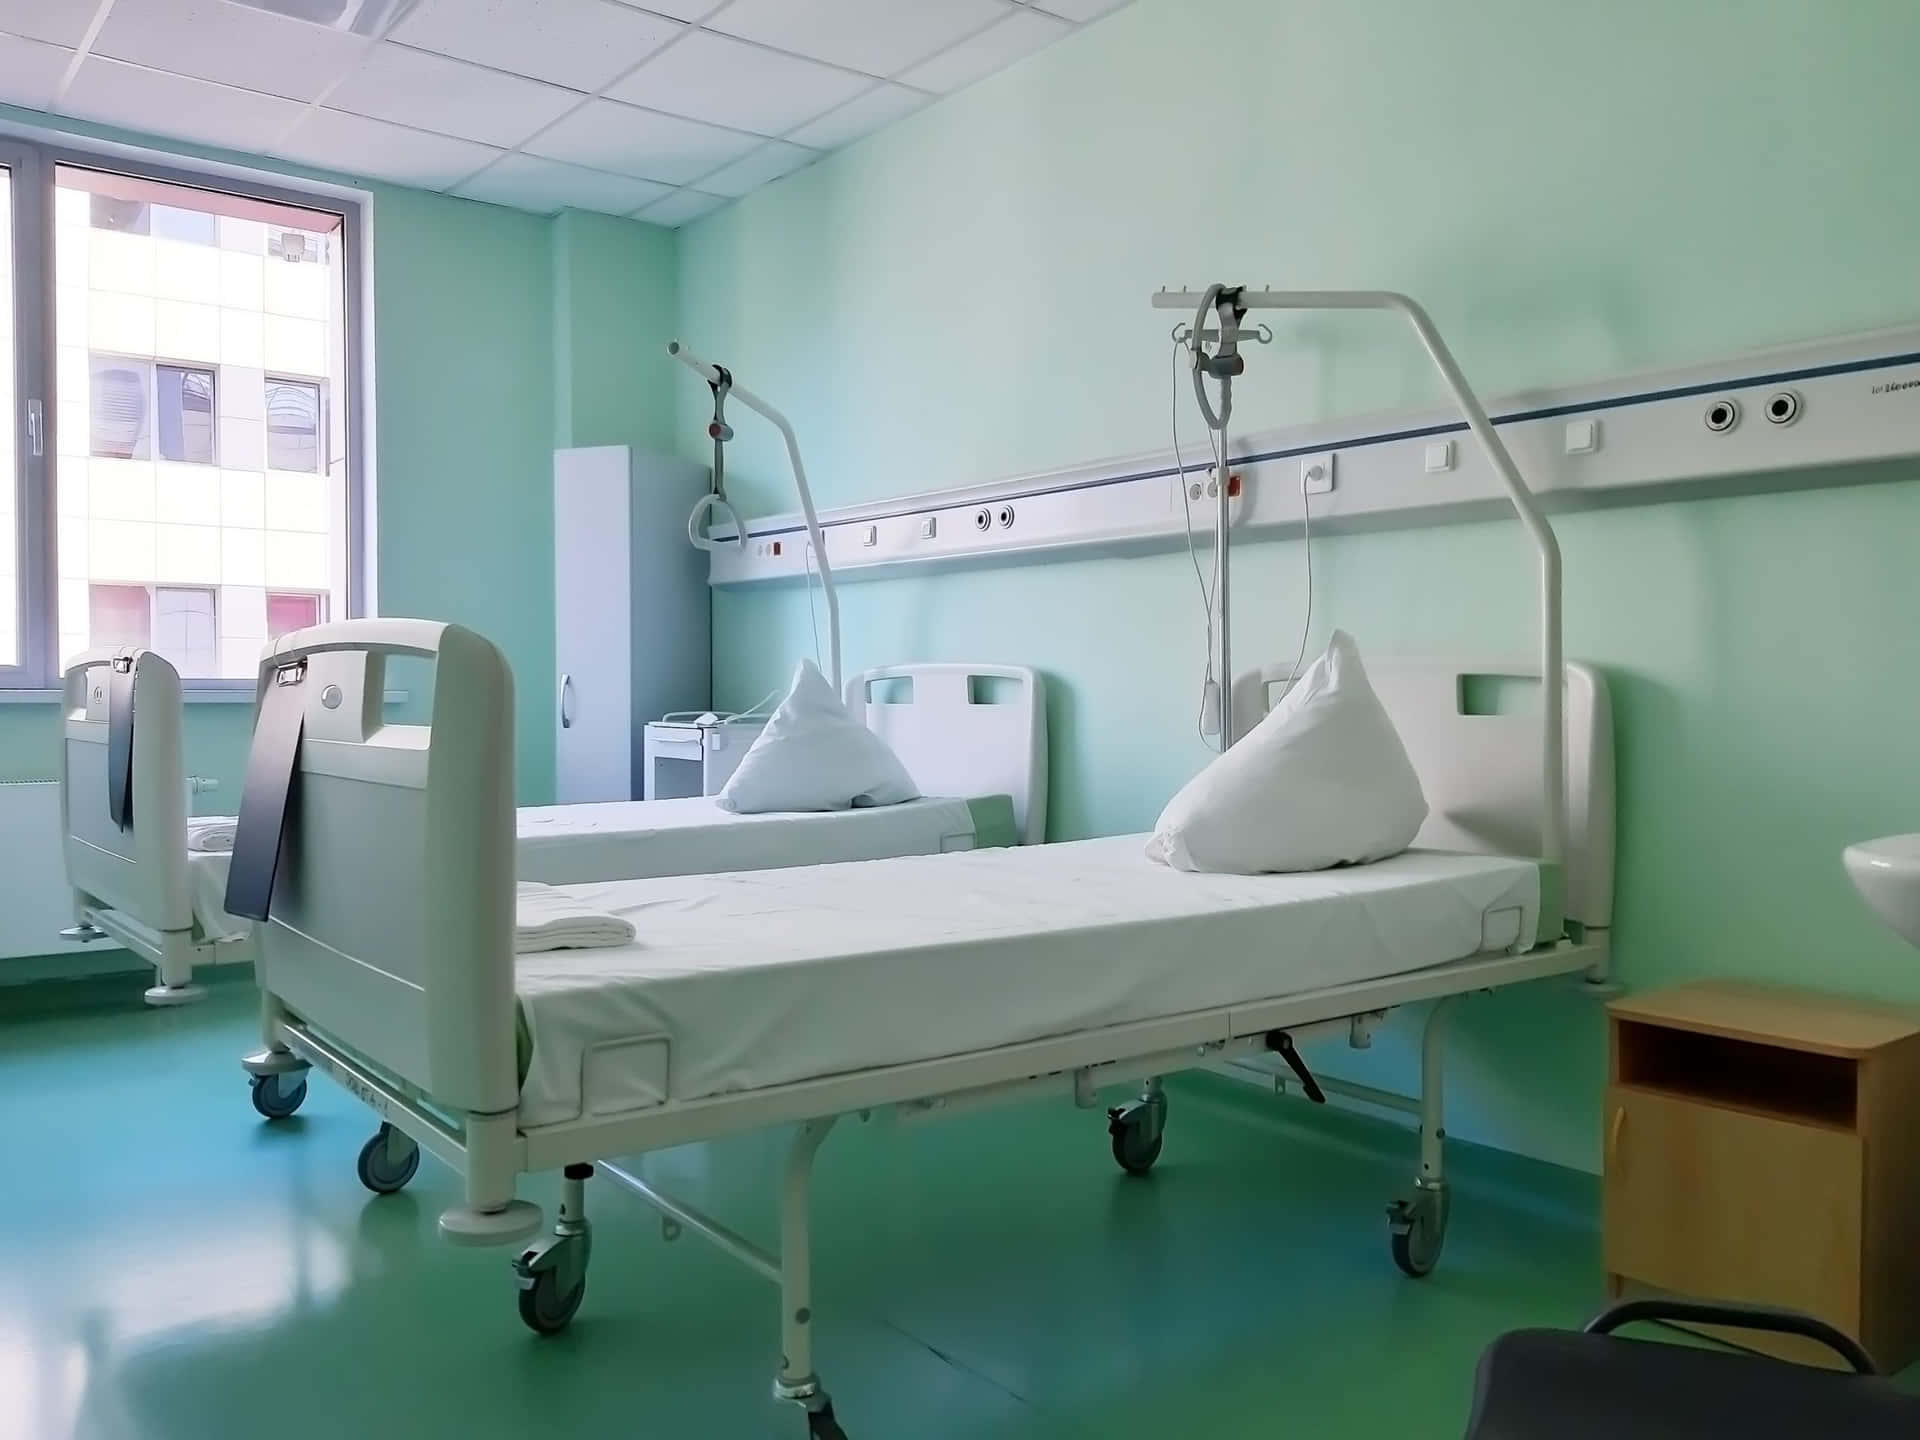 Hospital Room With Two Beds And A Sink